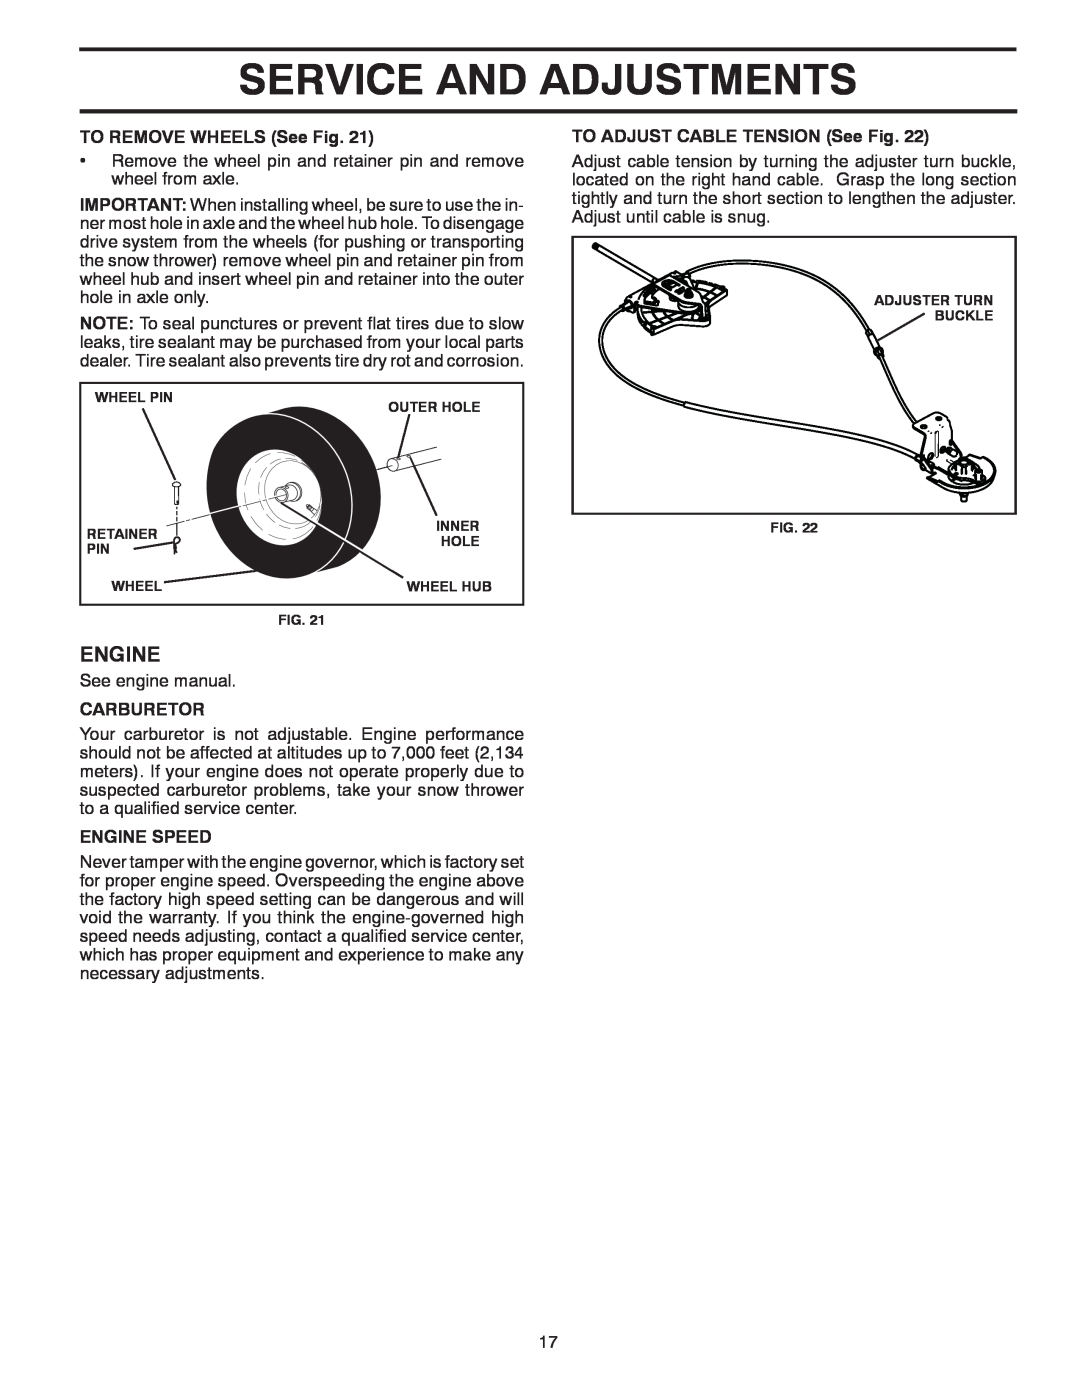 McCulloch MC12527ES owner manual Service And Adjustments, TO REMOVE WHEELS See Fig, Carburetor, Engine Speed 